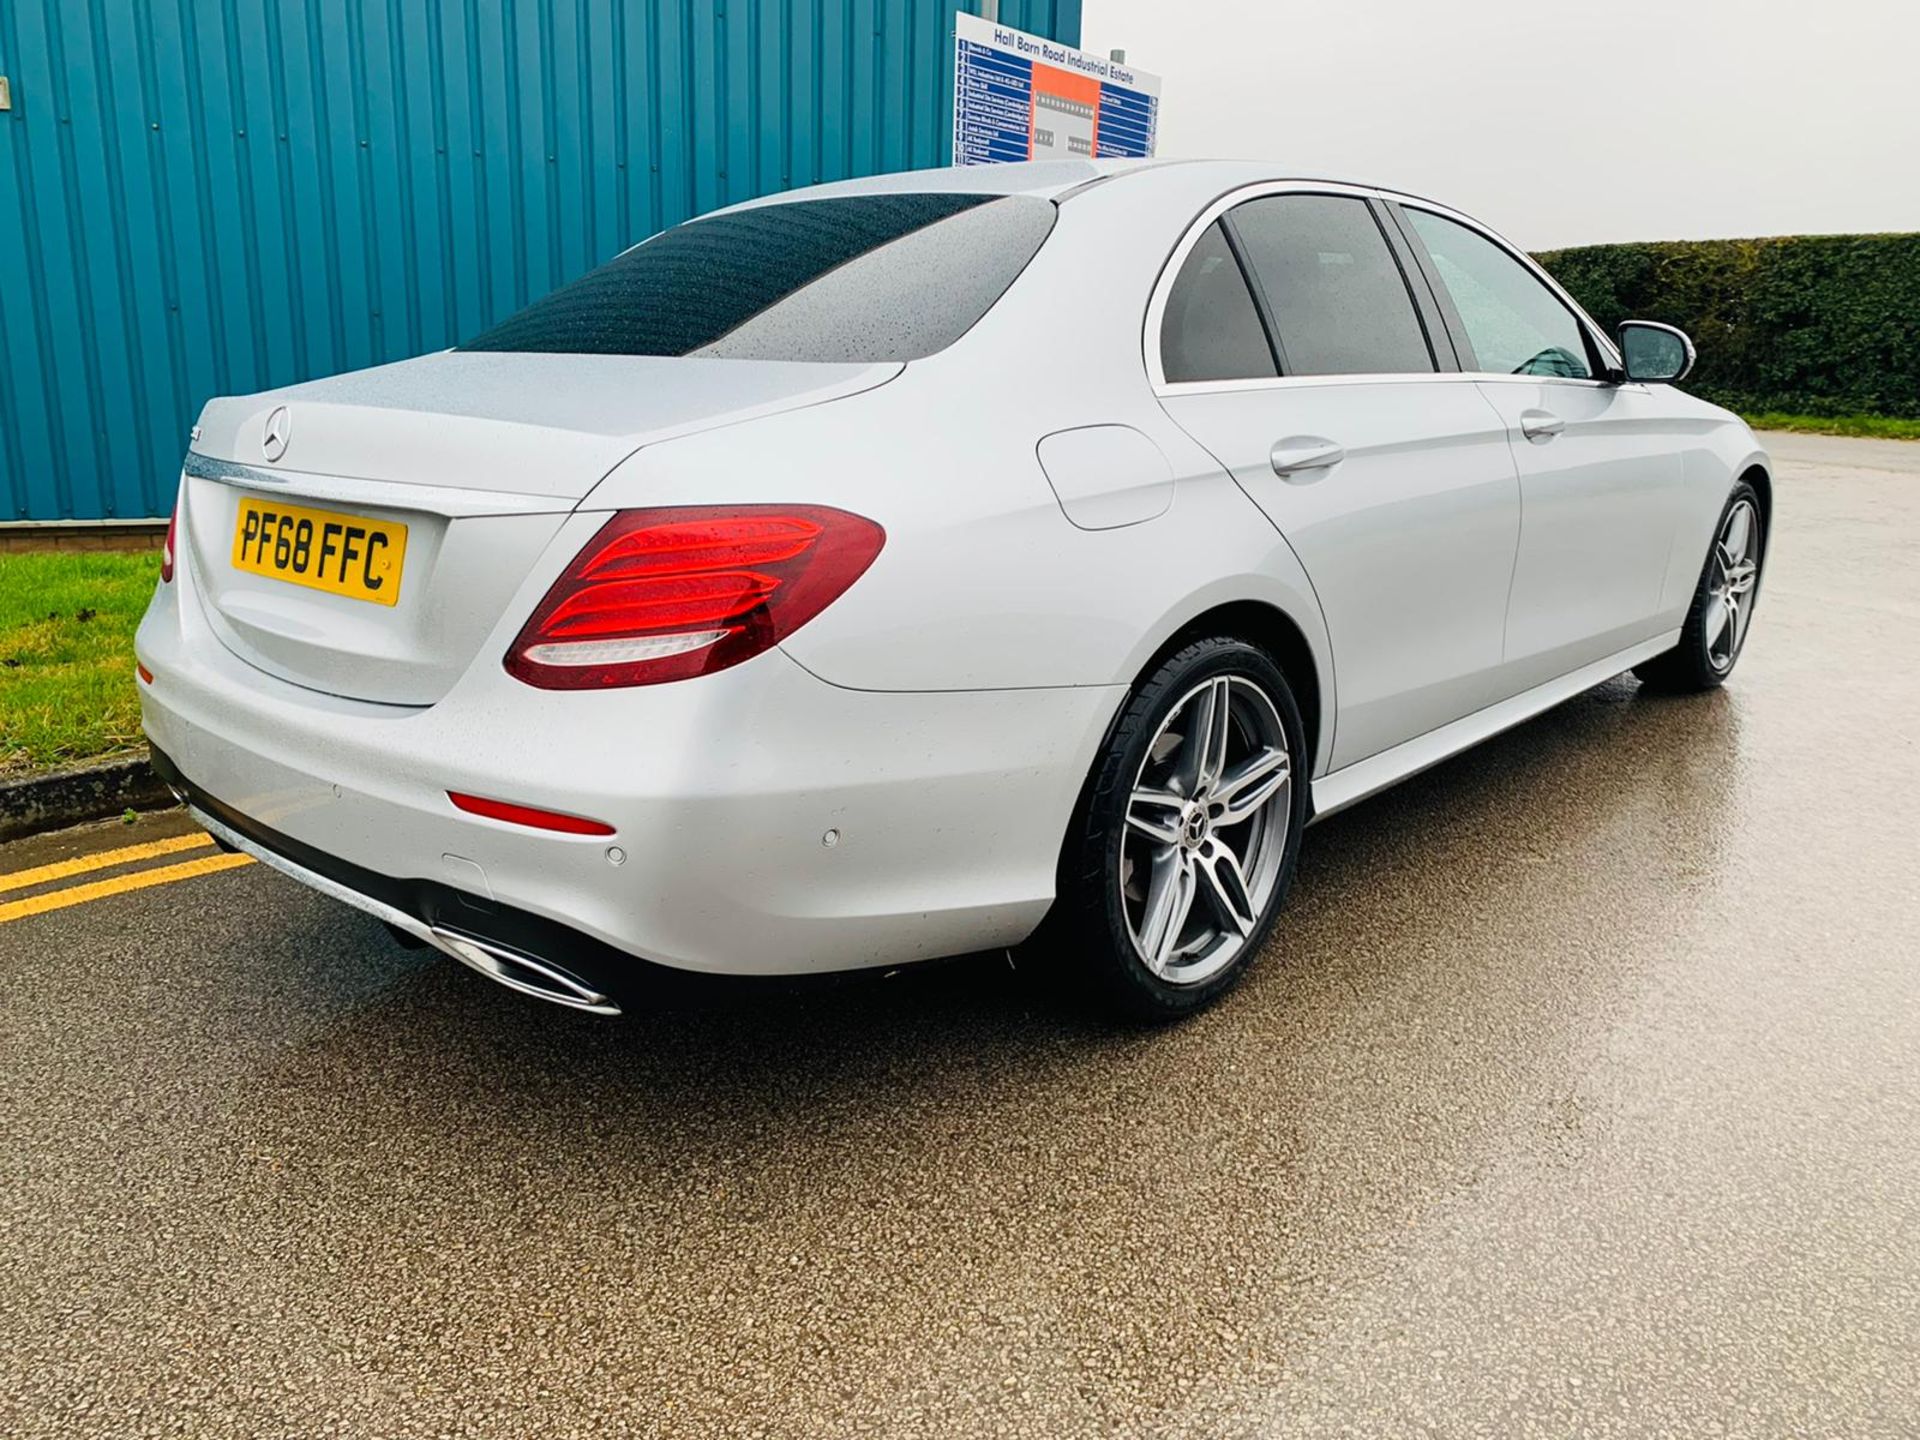 (RESERVE MET) Mercedes E220d AMG Line Auto 9G Tronic - 2019 Reg - Reversing Cam - 1 Owner From New - Image 9 of 30